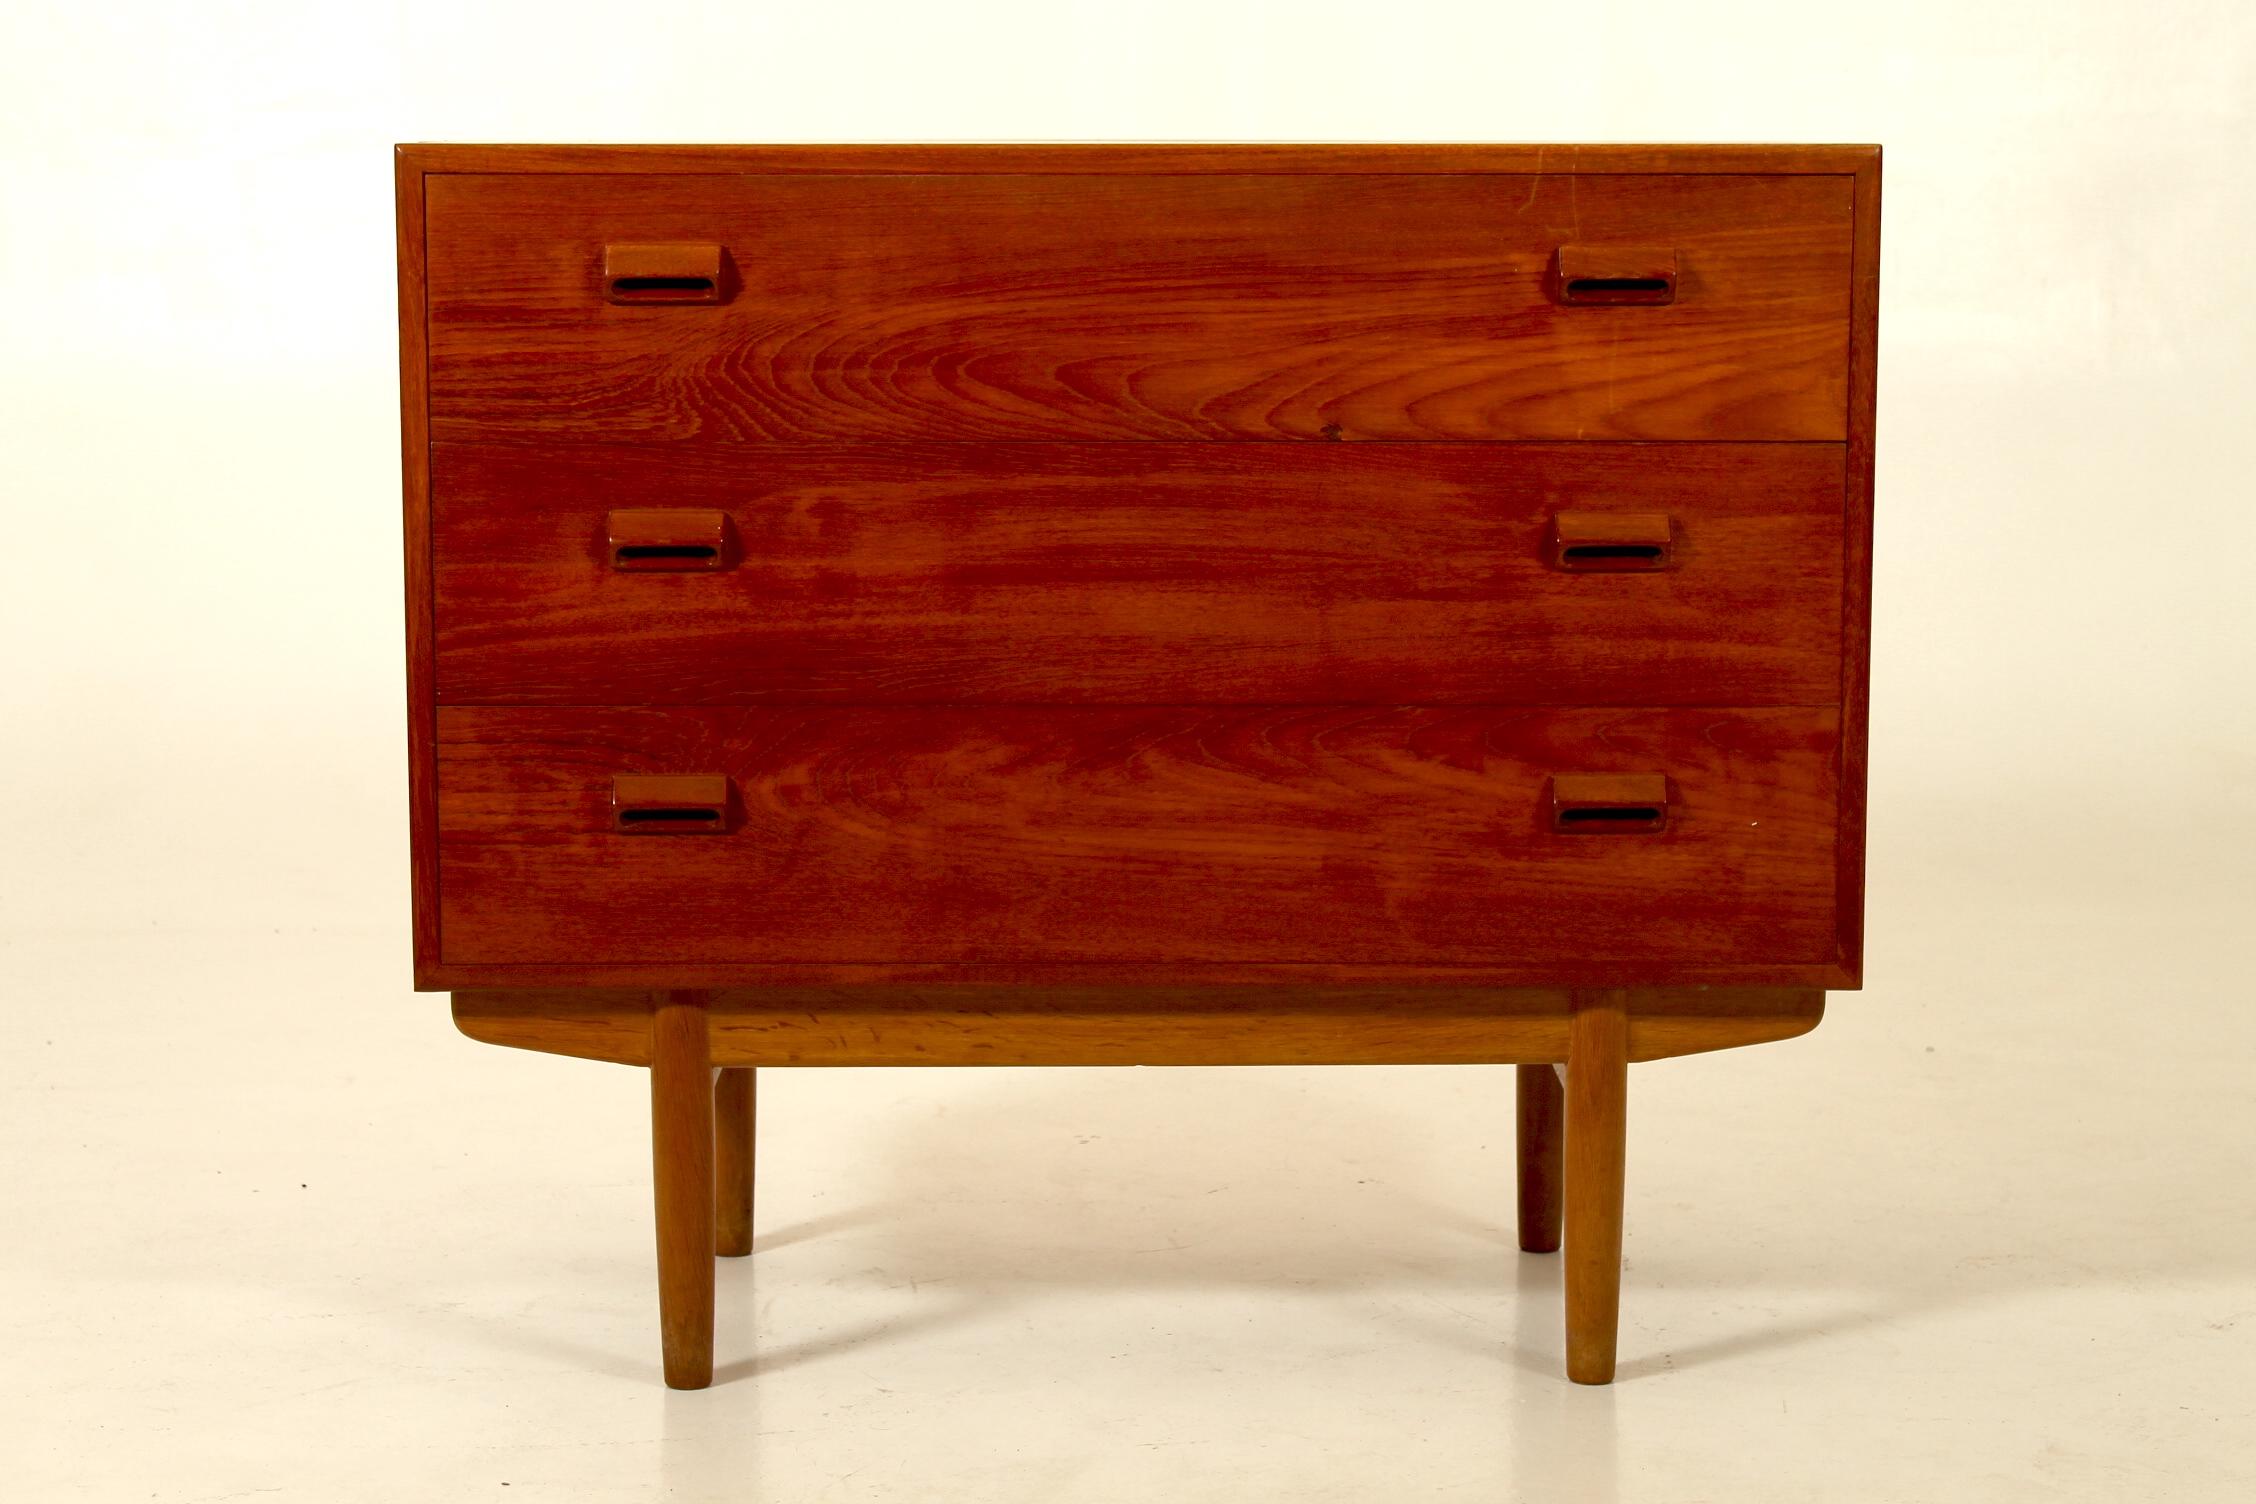 Hidden bureau / drawer with a fold up mirror, in teak with oak legs. Designed in the 1950s by Børge Mogensen and manufactured by Søborg Møbler, Denmark. Depth when open 84 cm